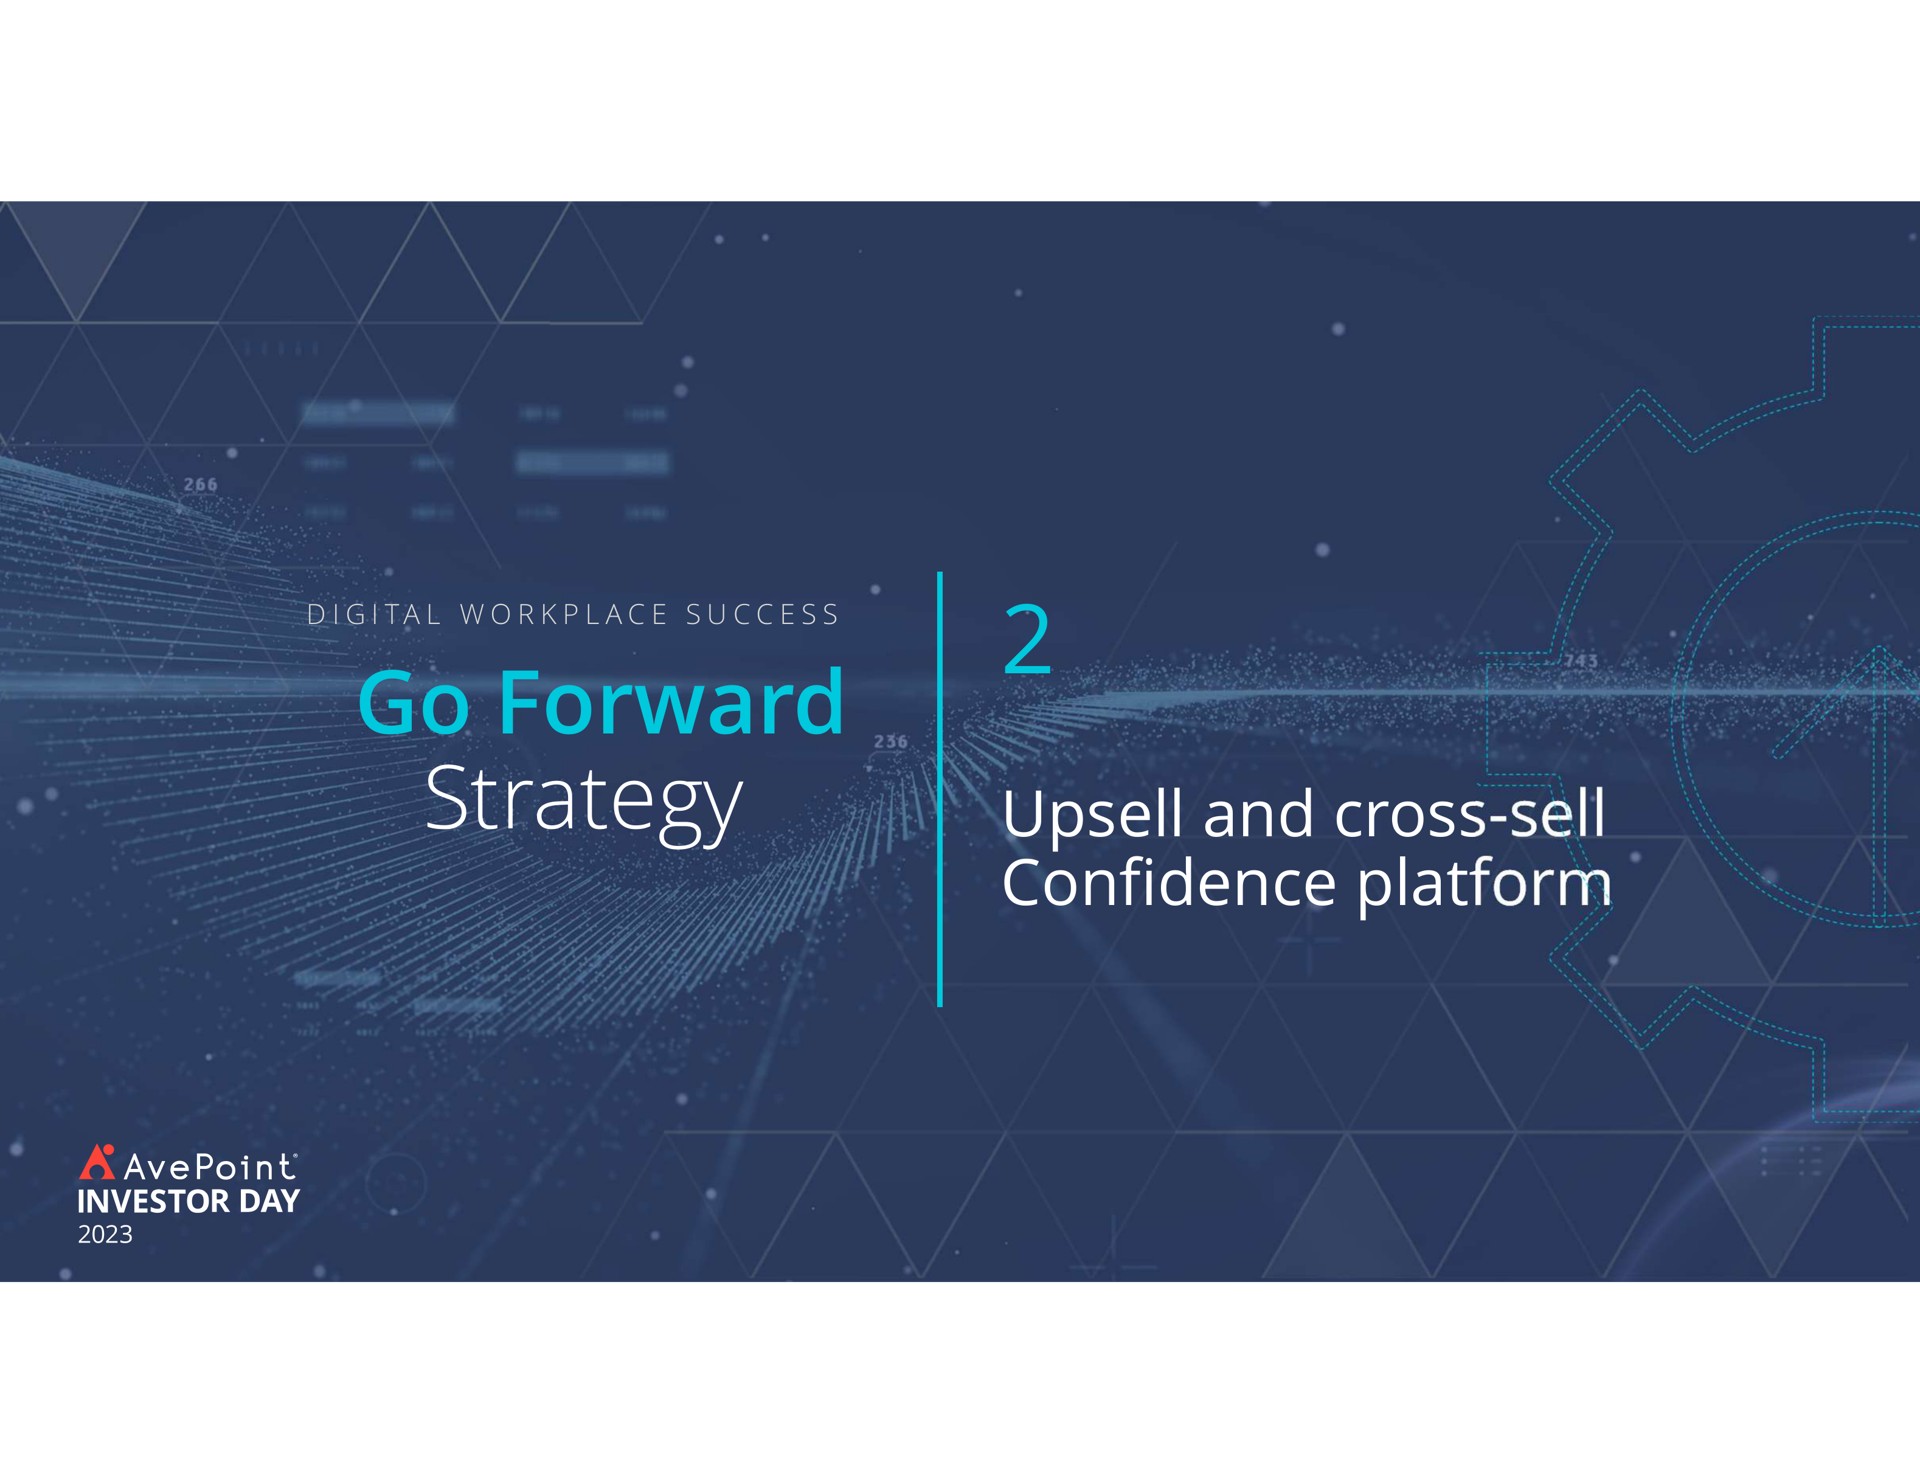 go forward strategy and cross sell confidence platform | AvePoint